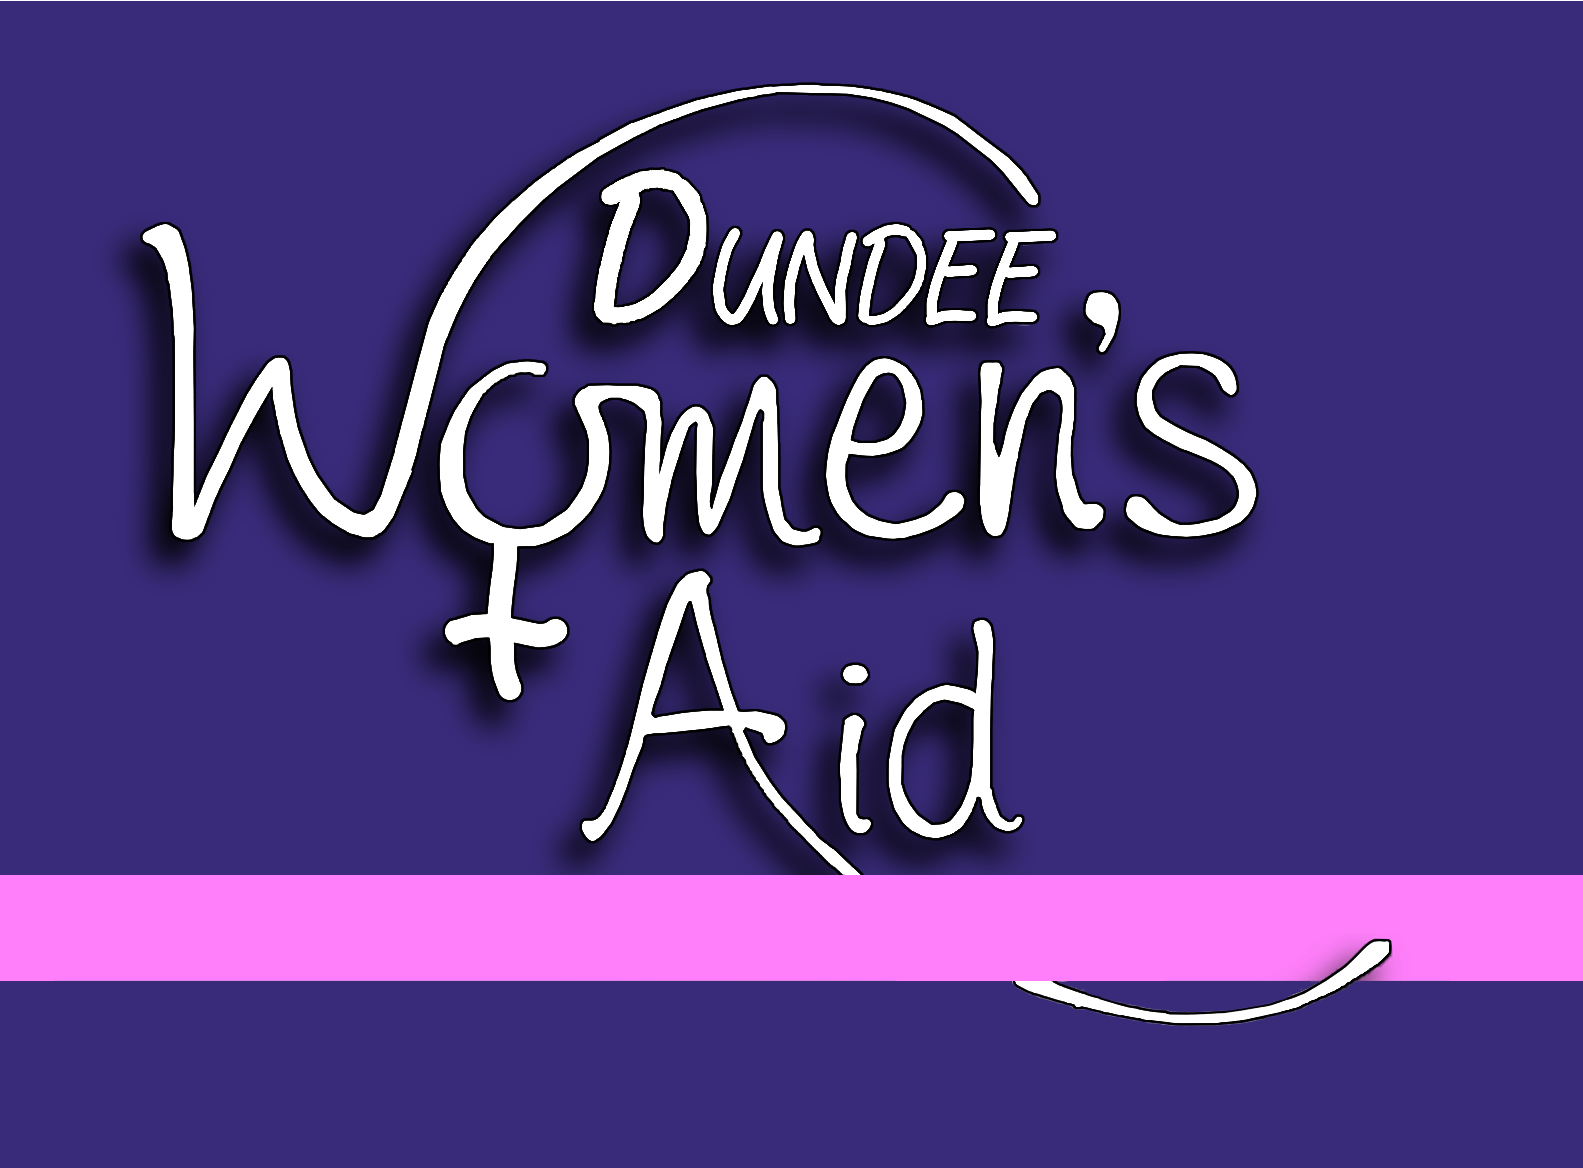 Dundee Women's Aid